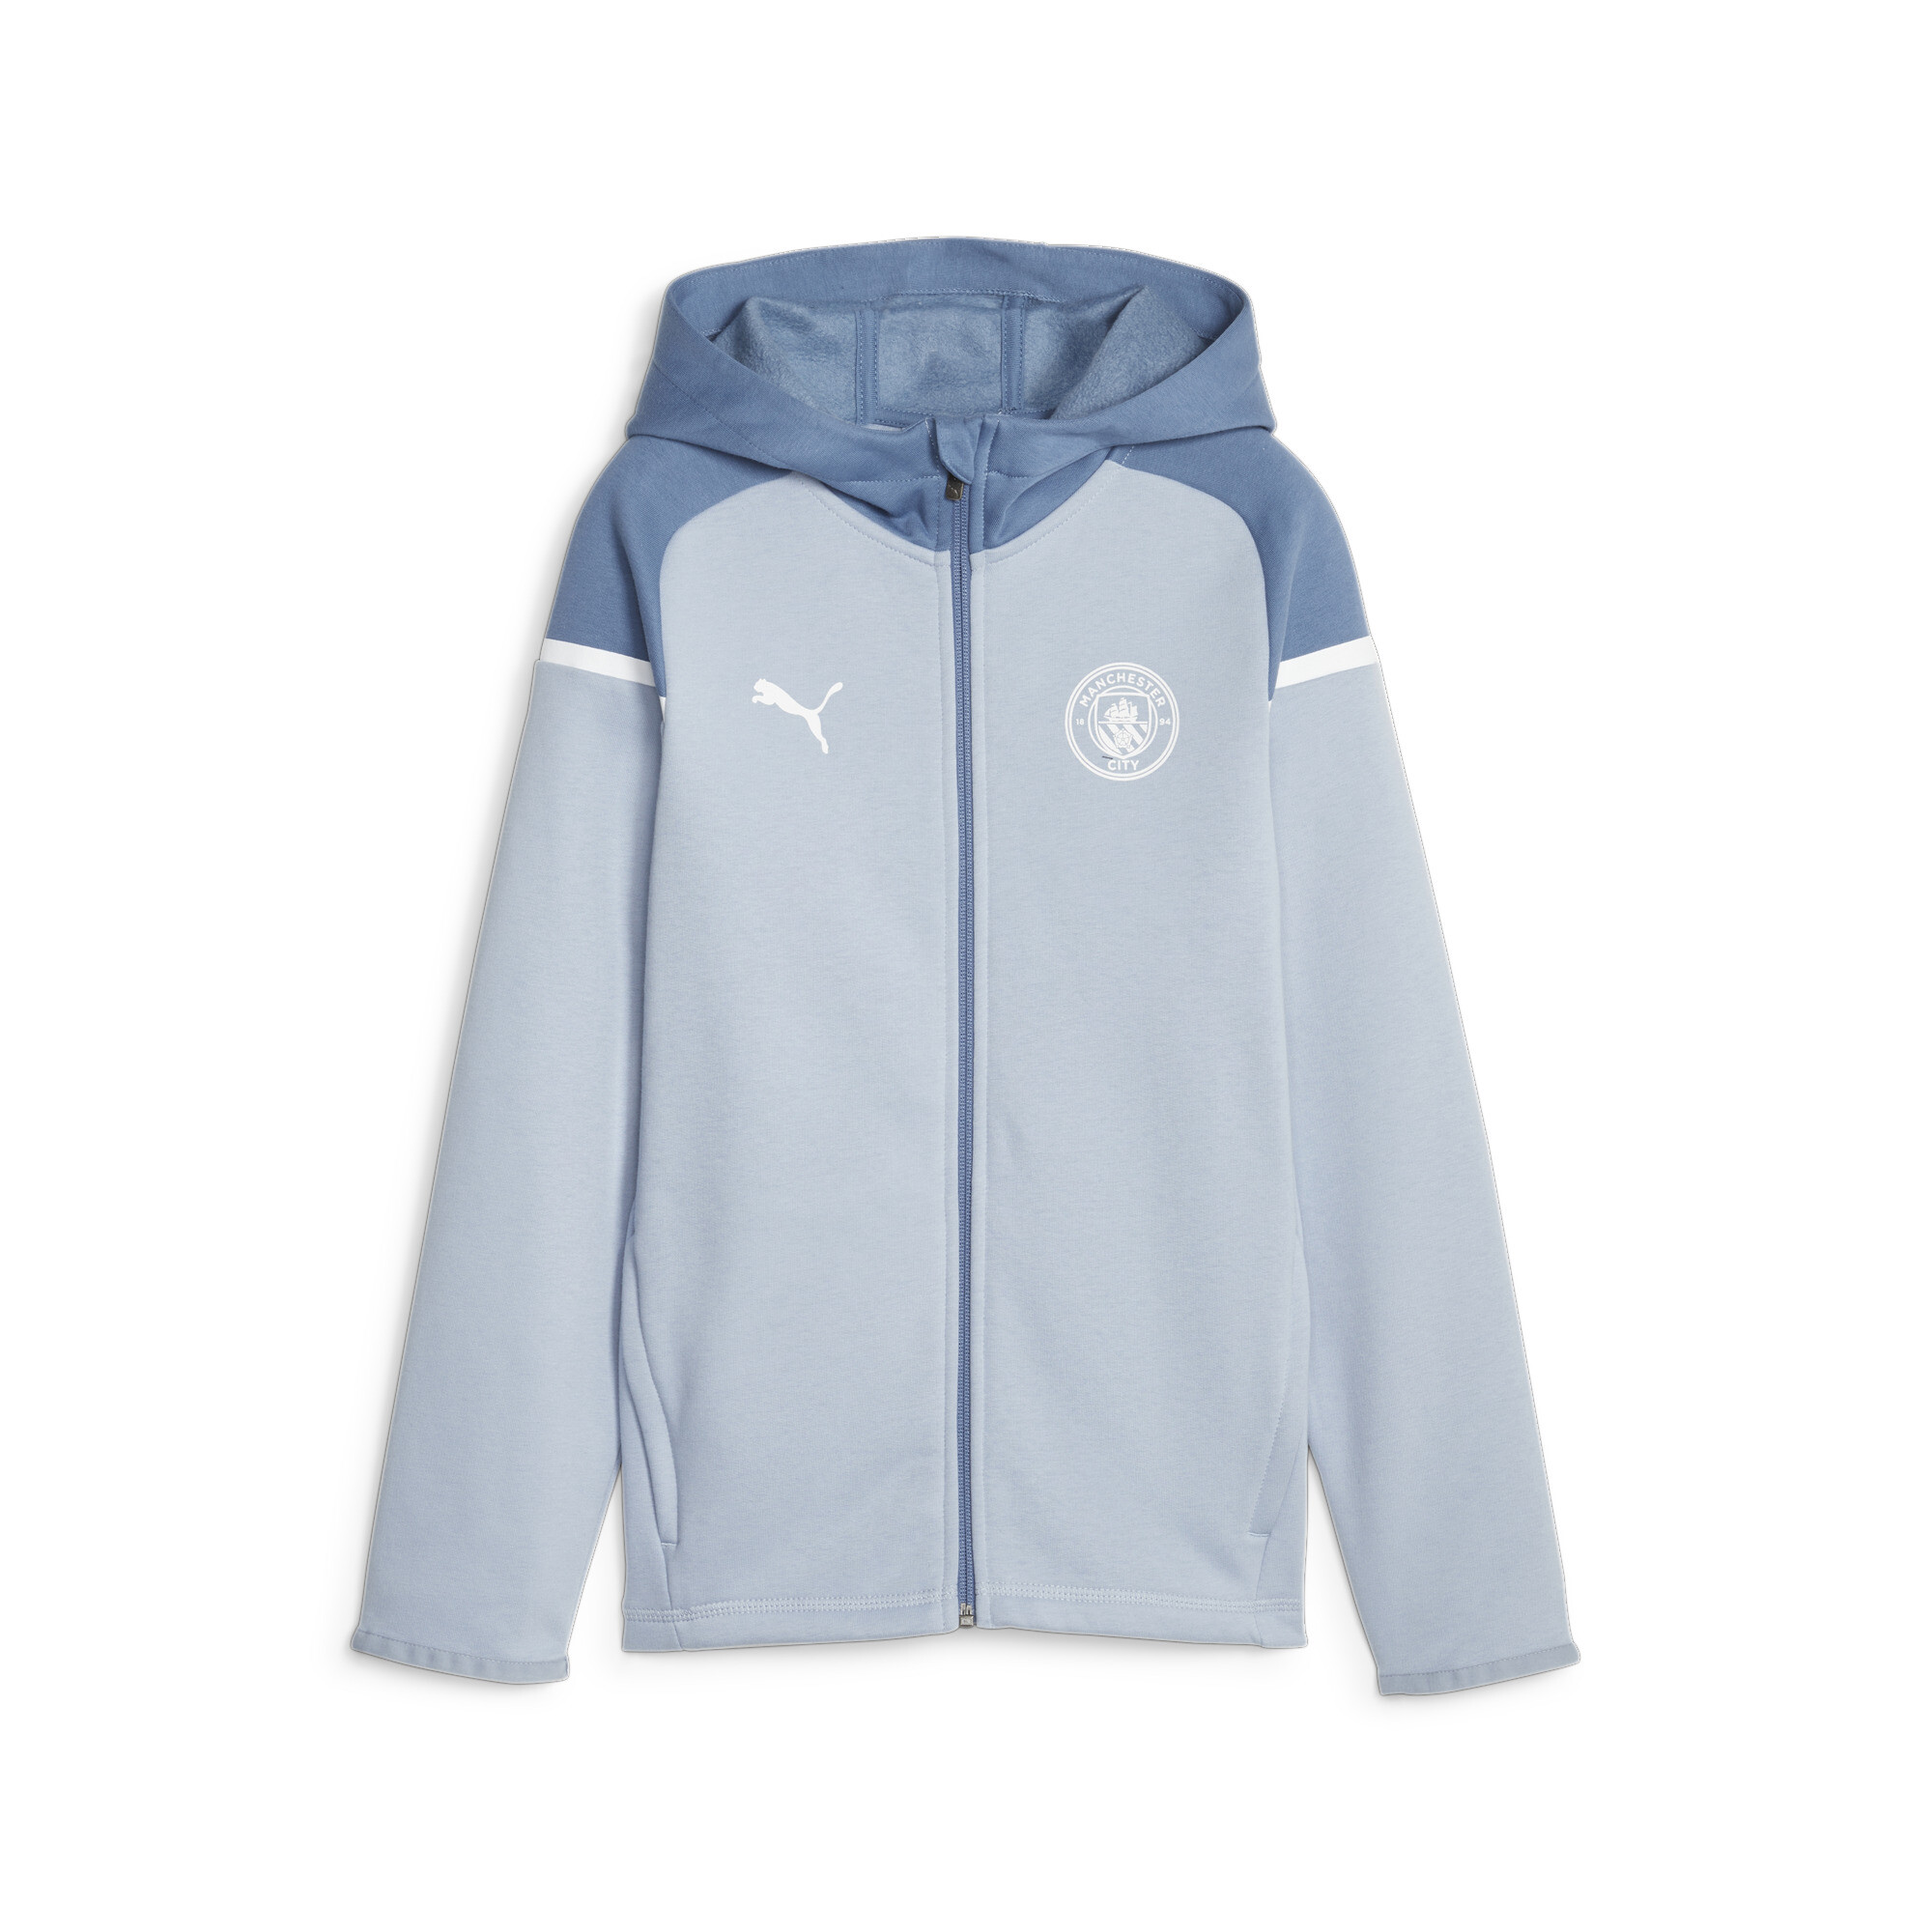 Puma Manchester City Football Casuals Youth Hooded Jacket, Blue, Size 5-6Y, Clothing